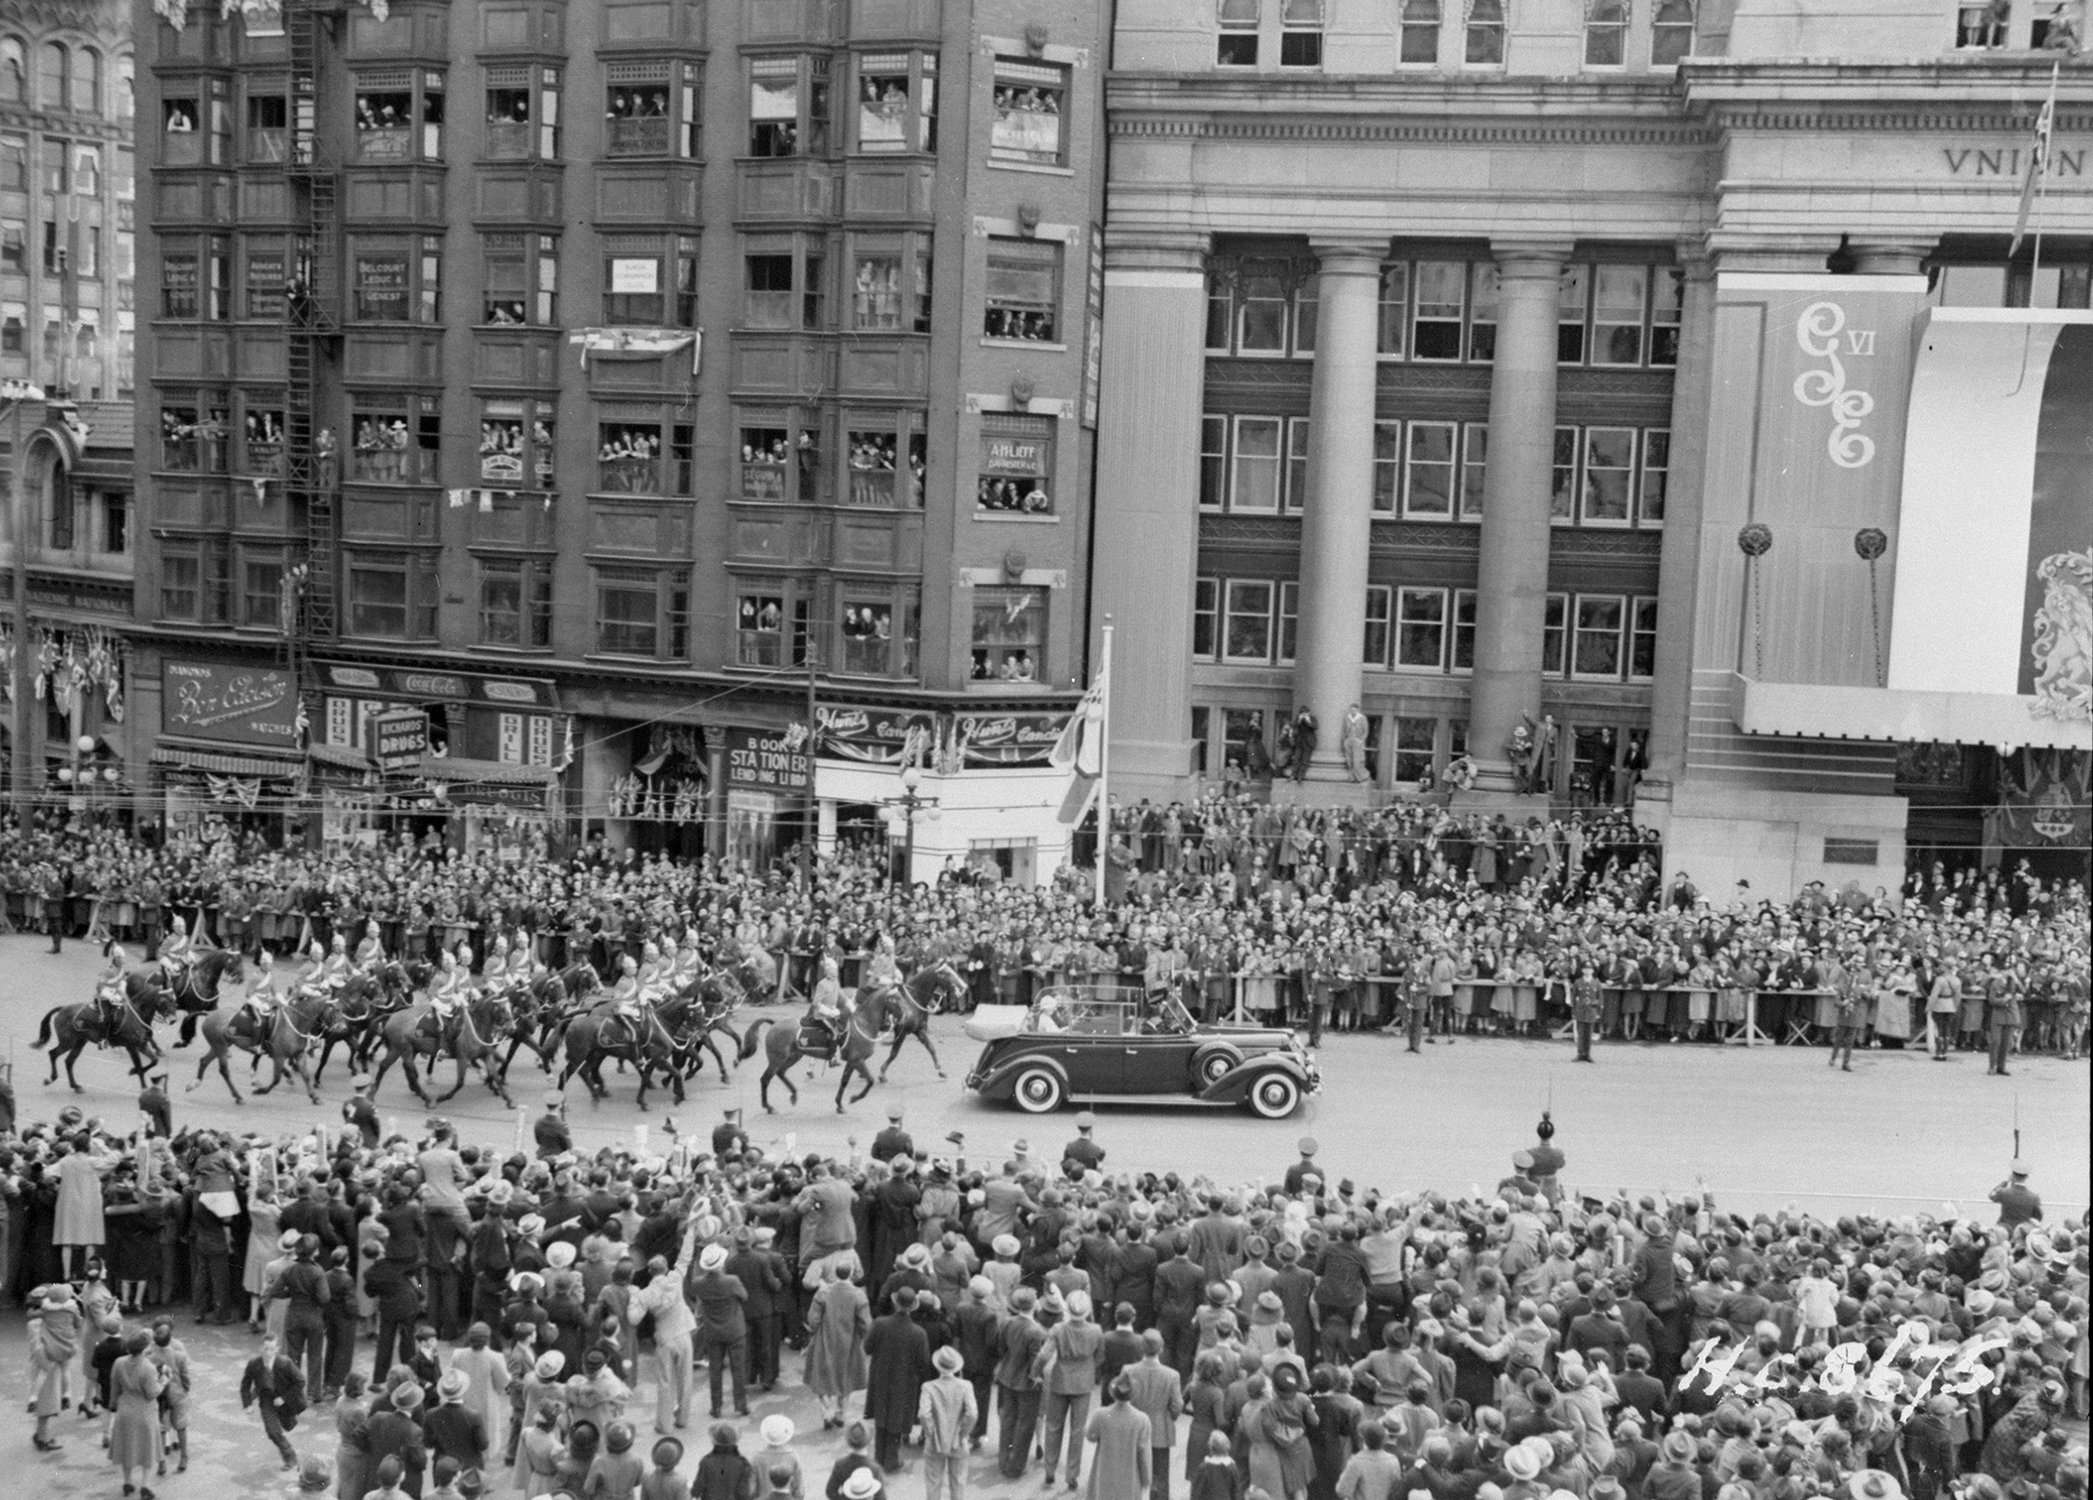 King George VI and his consort, Queen Elizabeth, later known as the Queen Mother, pass in front of Union Station on May 20, 1939, during a four-week cross-Canada royal tour.